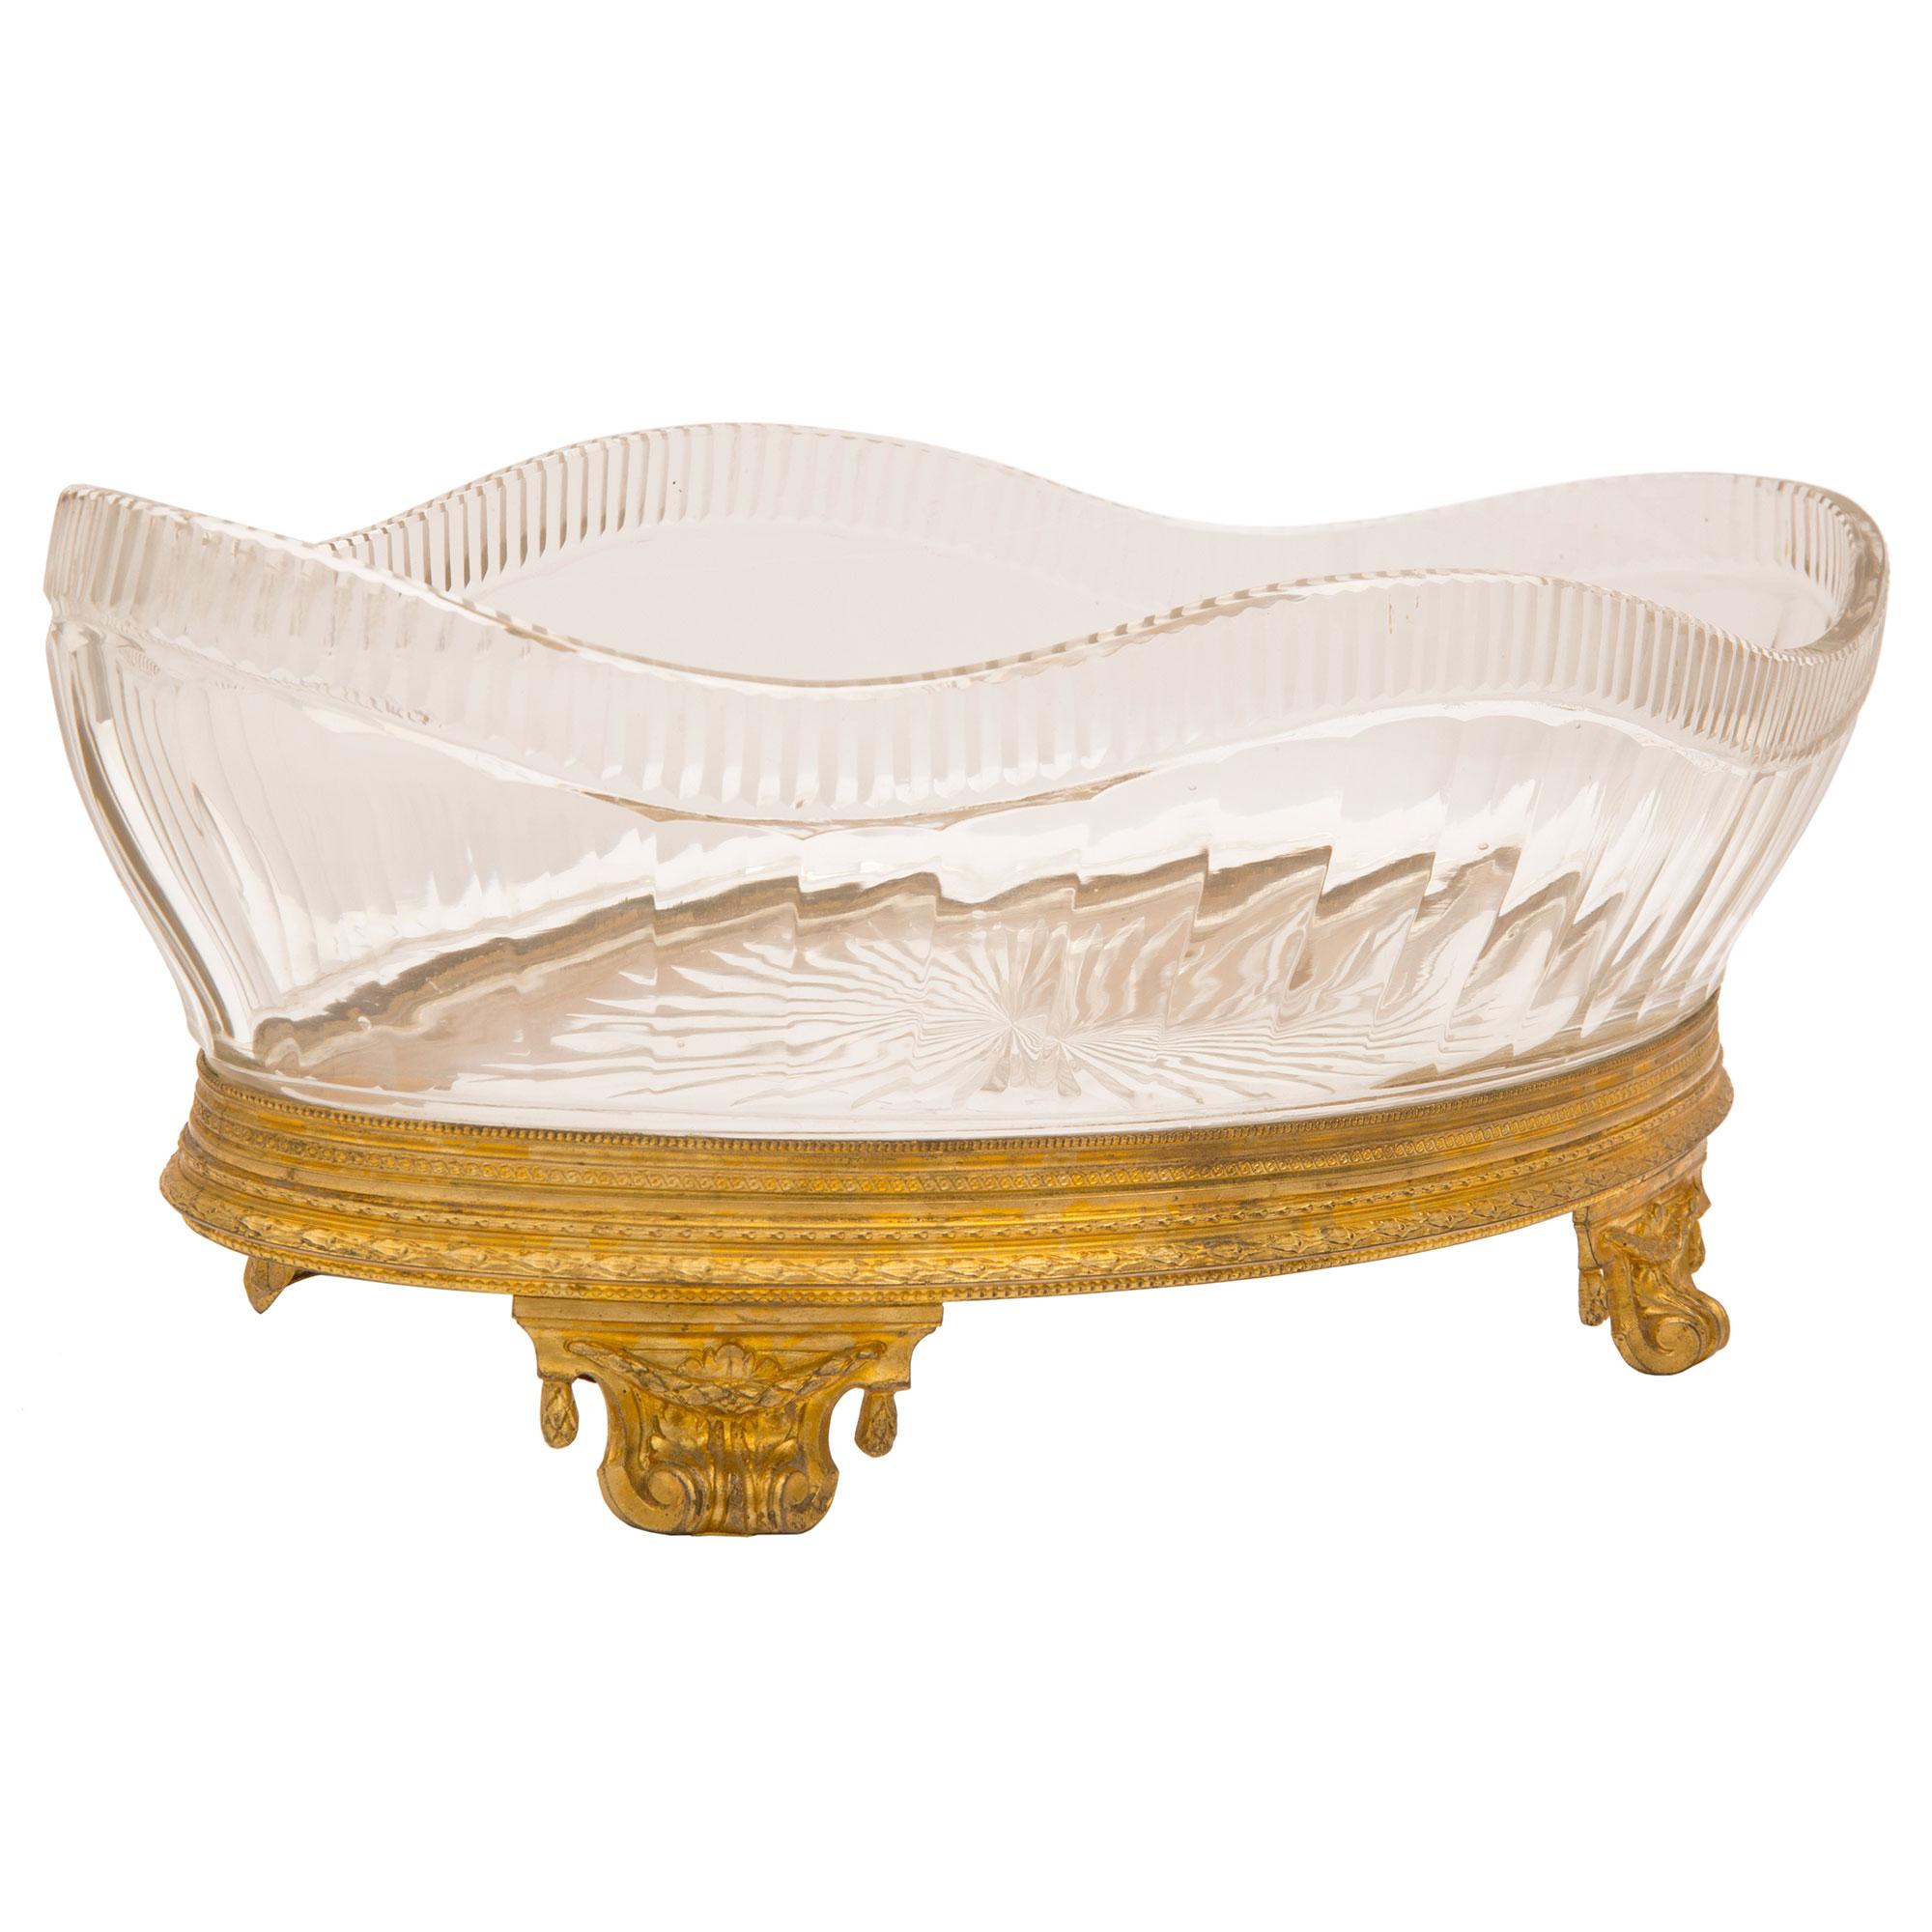 French 19th Century Louis XVI Style Oval Shaped Centerpiece Bowl In Good Condition For Sale In West Palm Beach, FL